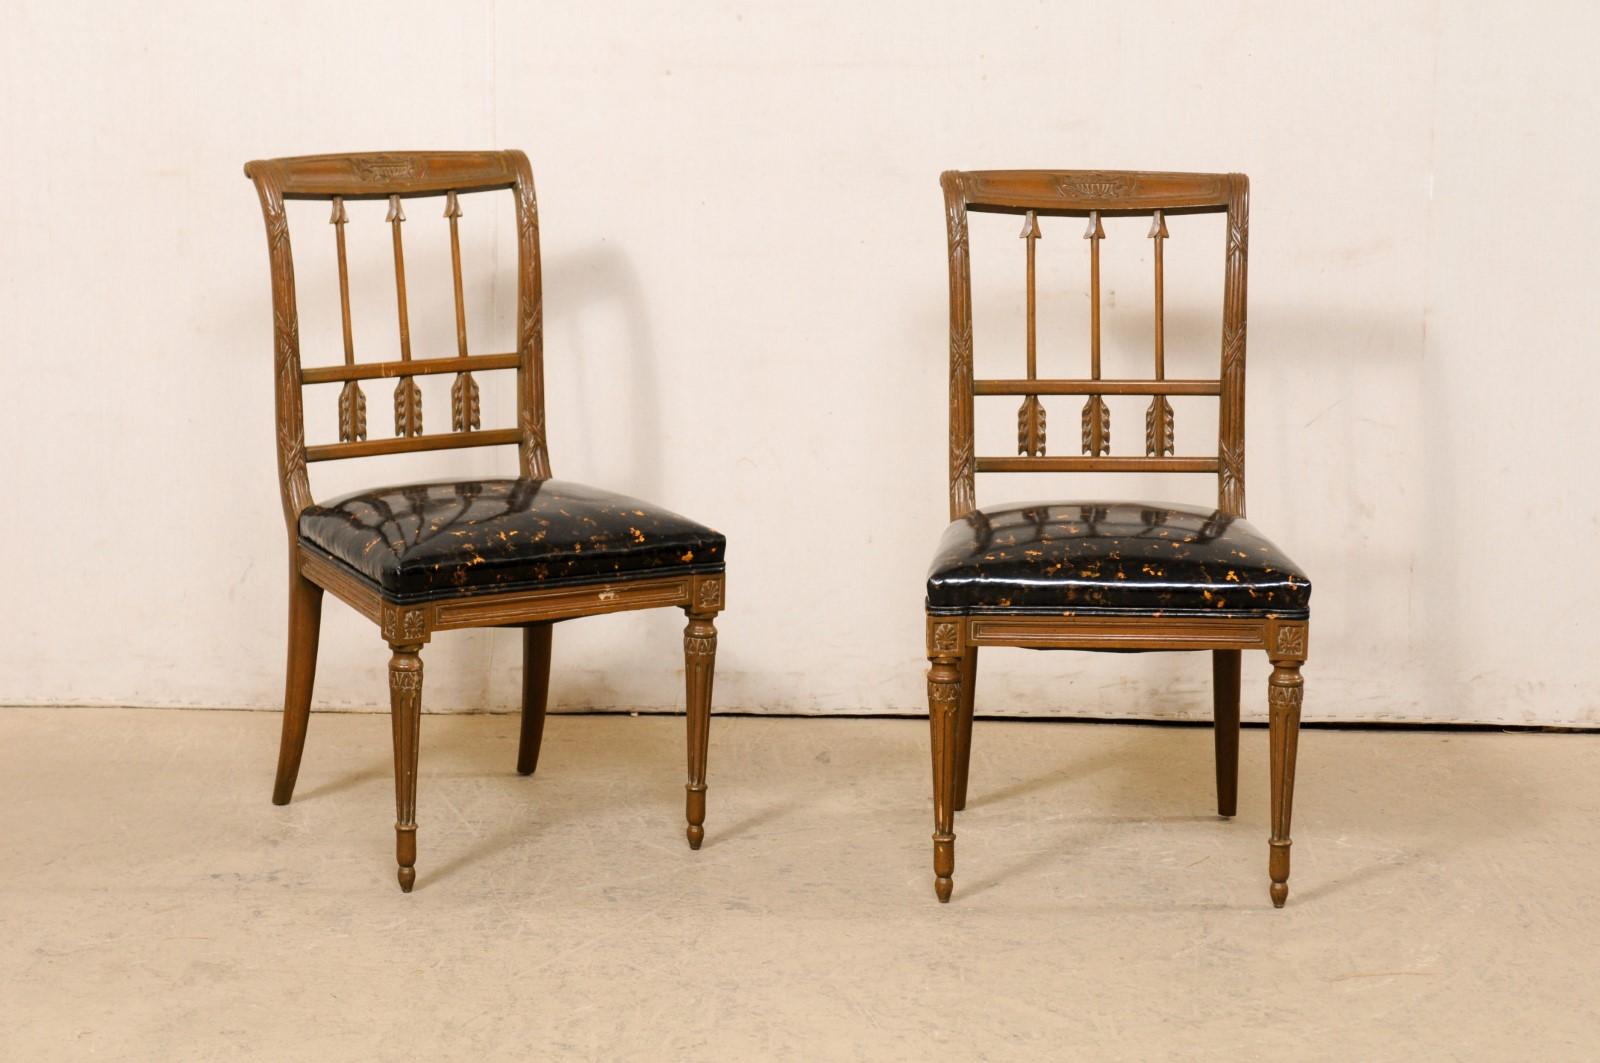 A French pair of Neoclassical carved and painted wood accent chairs, with upholstered seats, from the mid 20th century. These vintage chairs from France feature beautiful arrow carved back-splats, set within a frame carved with urn and twined-reed